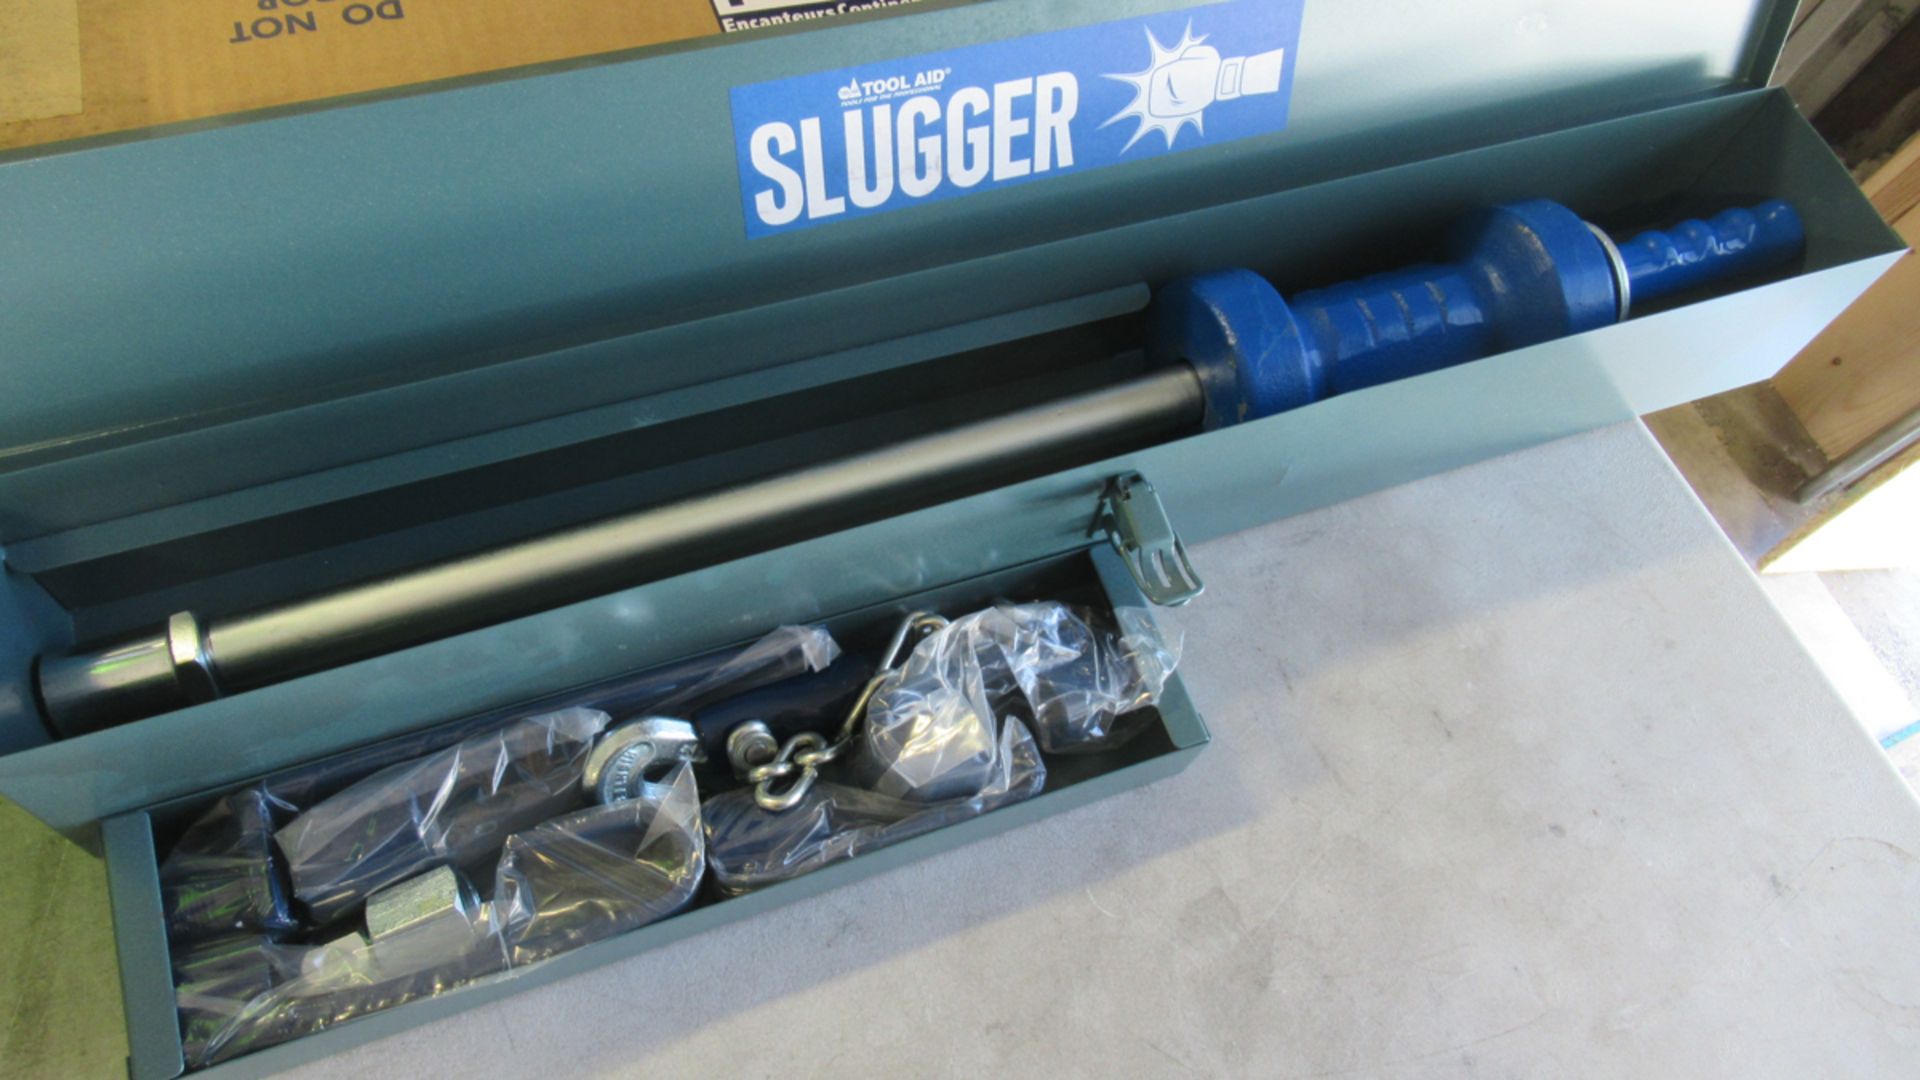 THE SLUGGER IN A TOOL BOX S&G TOOL AID CORP 81100